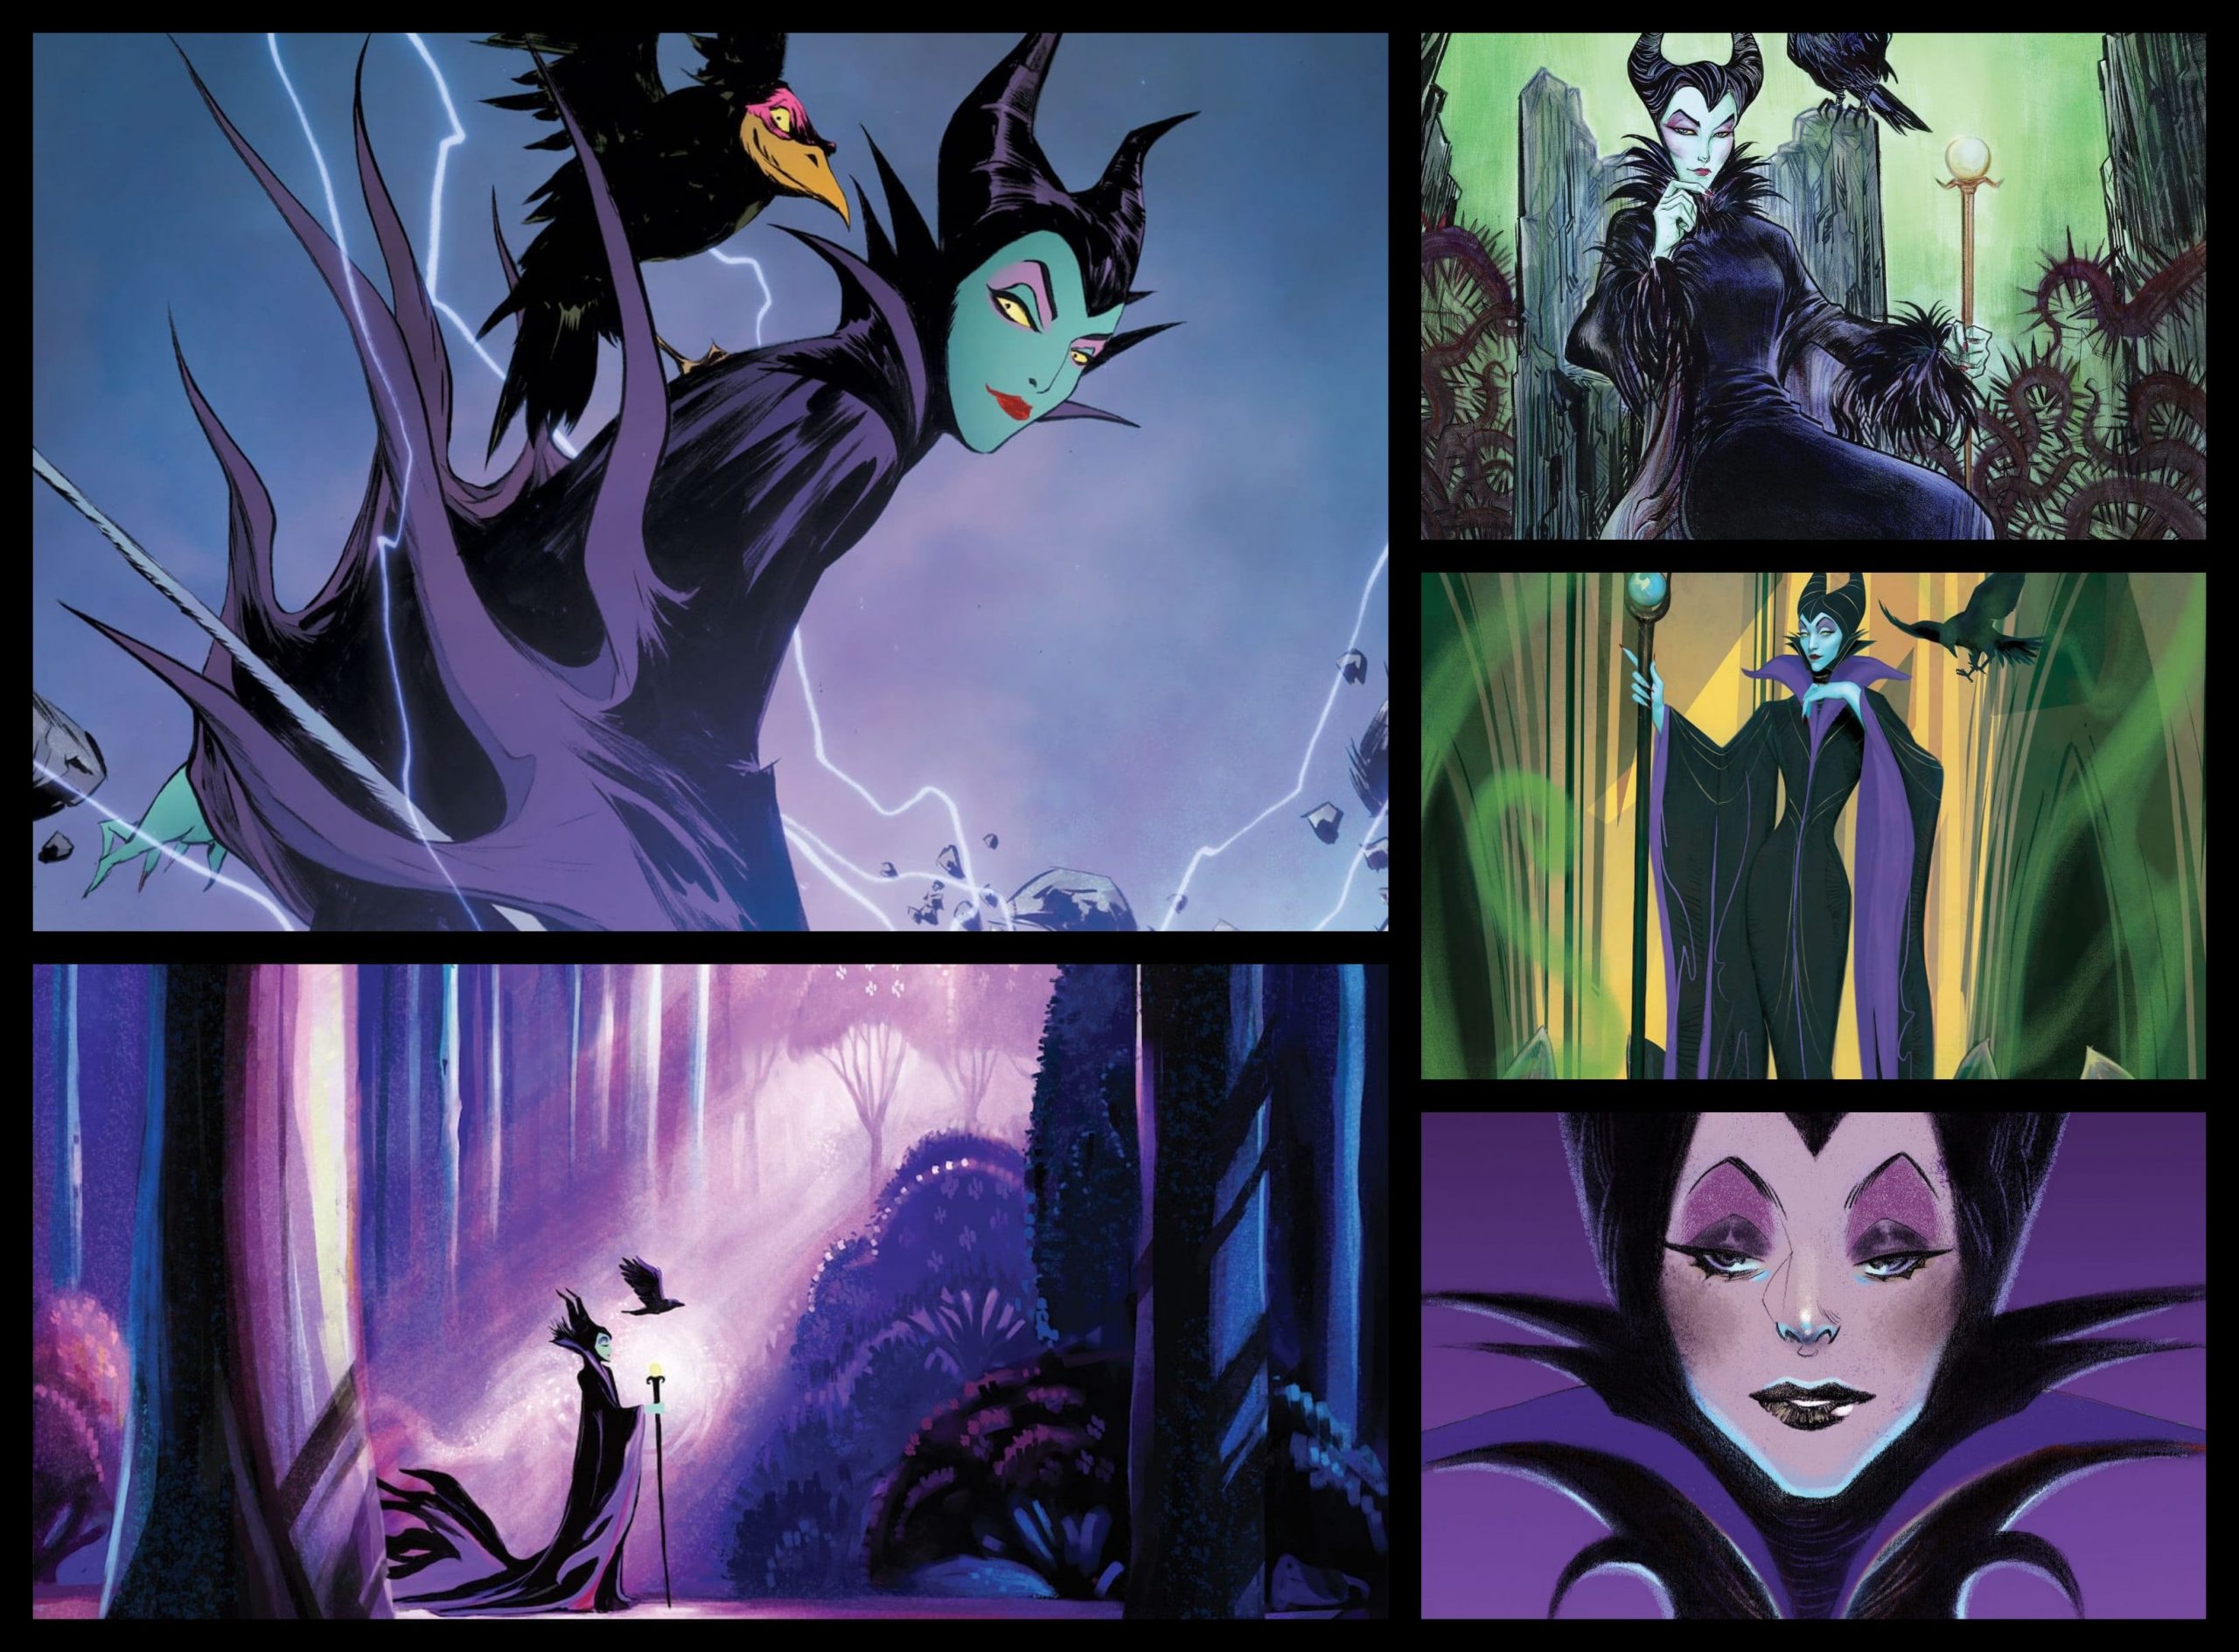 Dynamite sets May 2023 for 'Maleficent' comic series debut